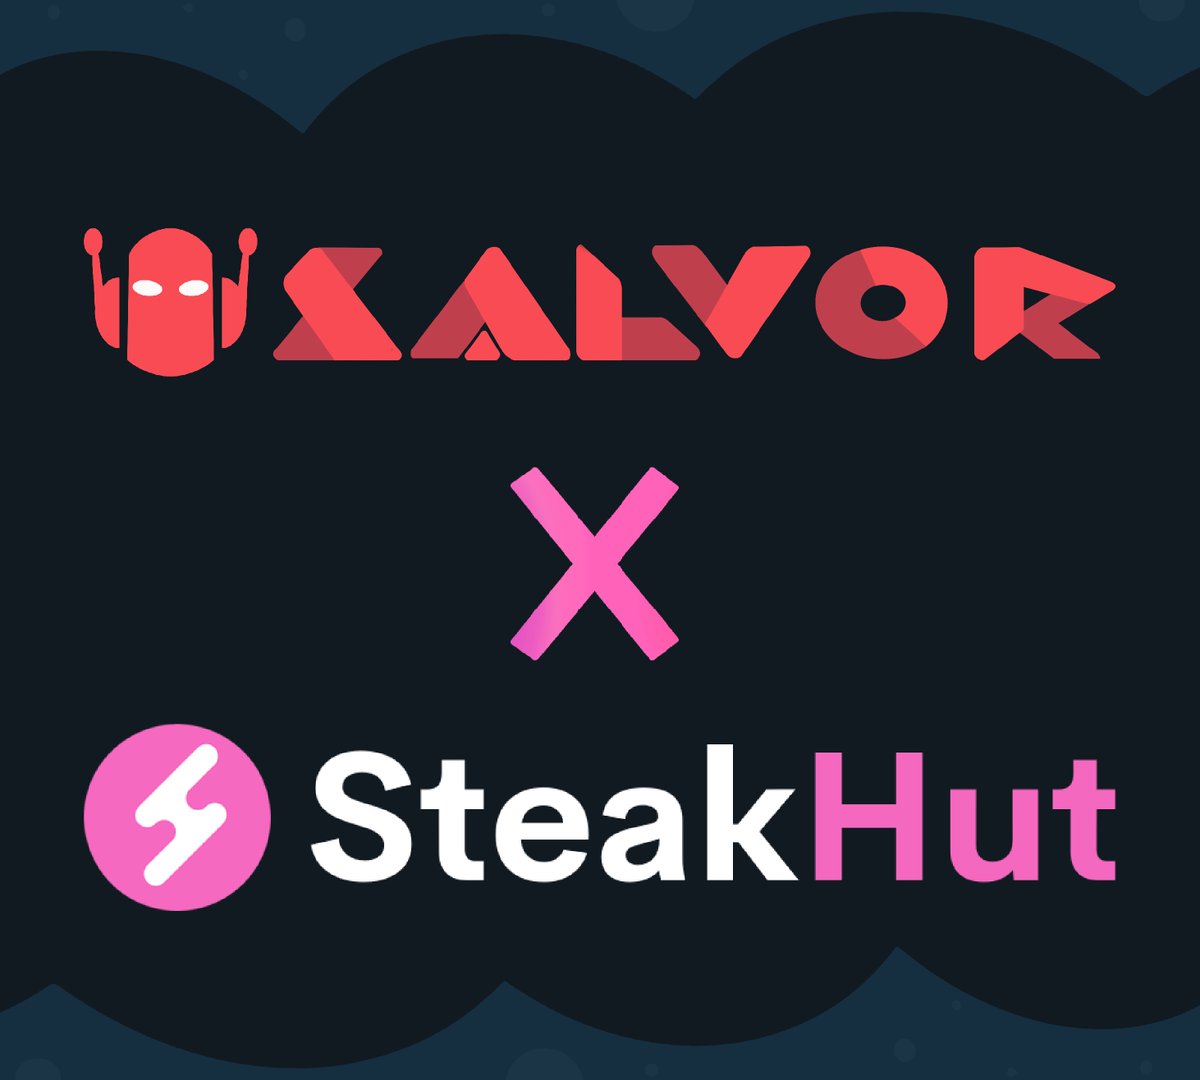 🚨PARTNERSHIP ANNOUNCEMENT 🚨 SALVOR X STEAKHUT 🤖🐮 Thanks to @steakhut_fi you can now stake ART/AVAX and start farming bonus $ART and $STEAK rewards! All you need to do is: ✅Stake your $ART & $AVAX to SteakHut's pool ✅Head over to BOOST and stake your SteakHut LP tokens